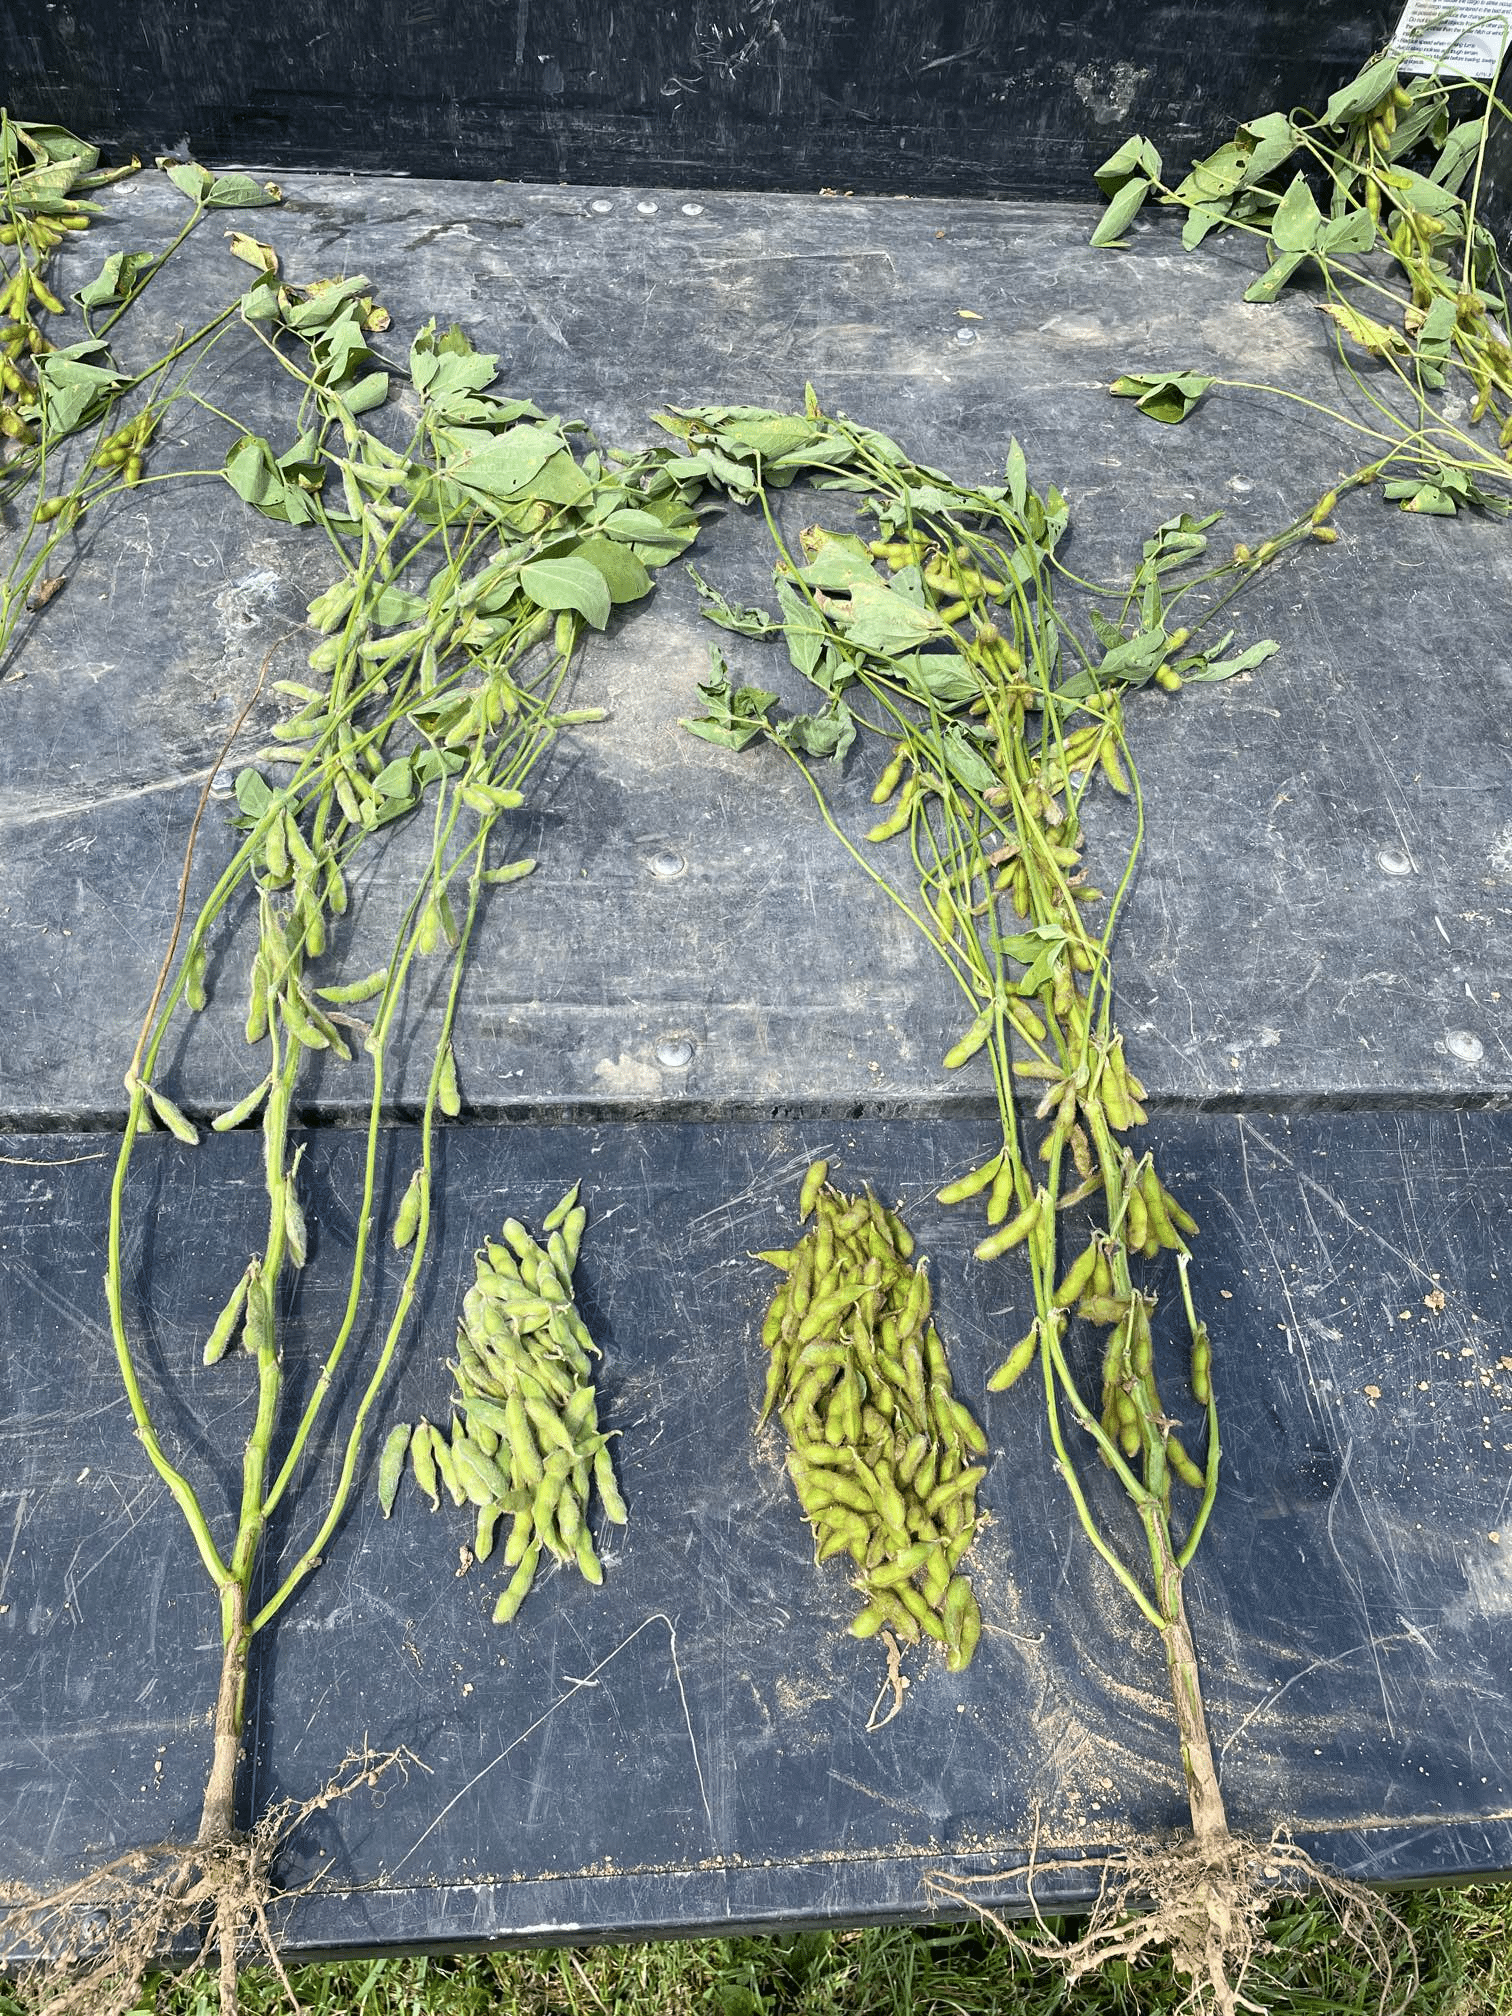 Untreated and AMS-treated soybean plants laying on the bed of a pick-up truck. AMS-treated soybeans have significantly more pods.